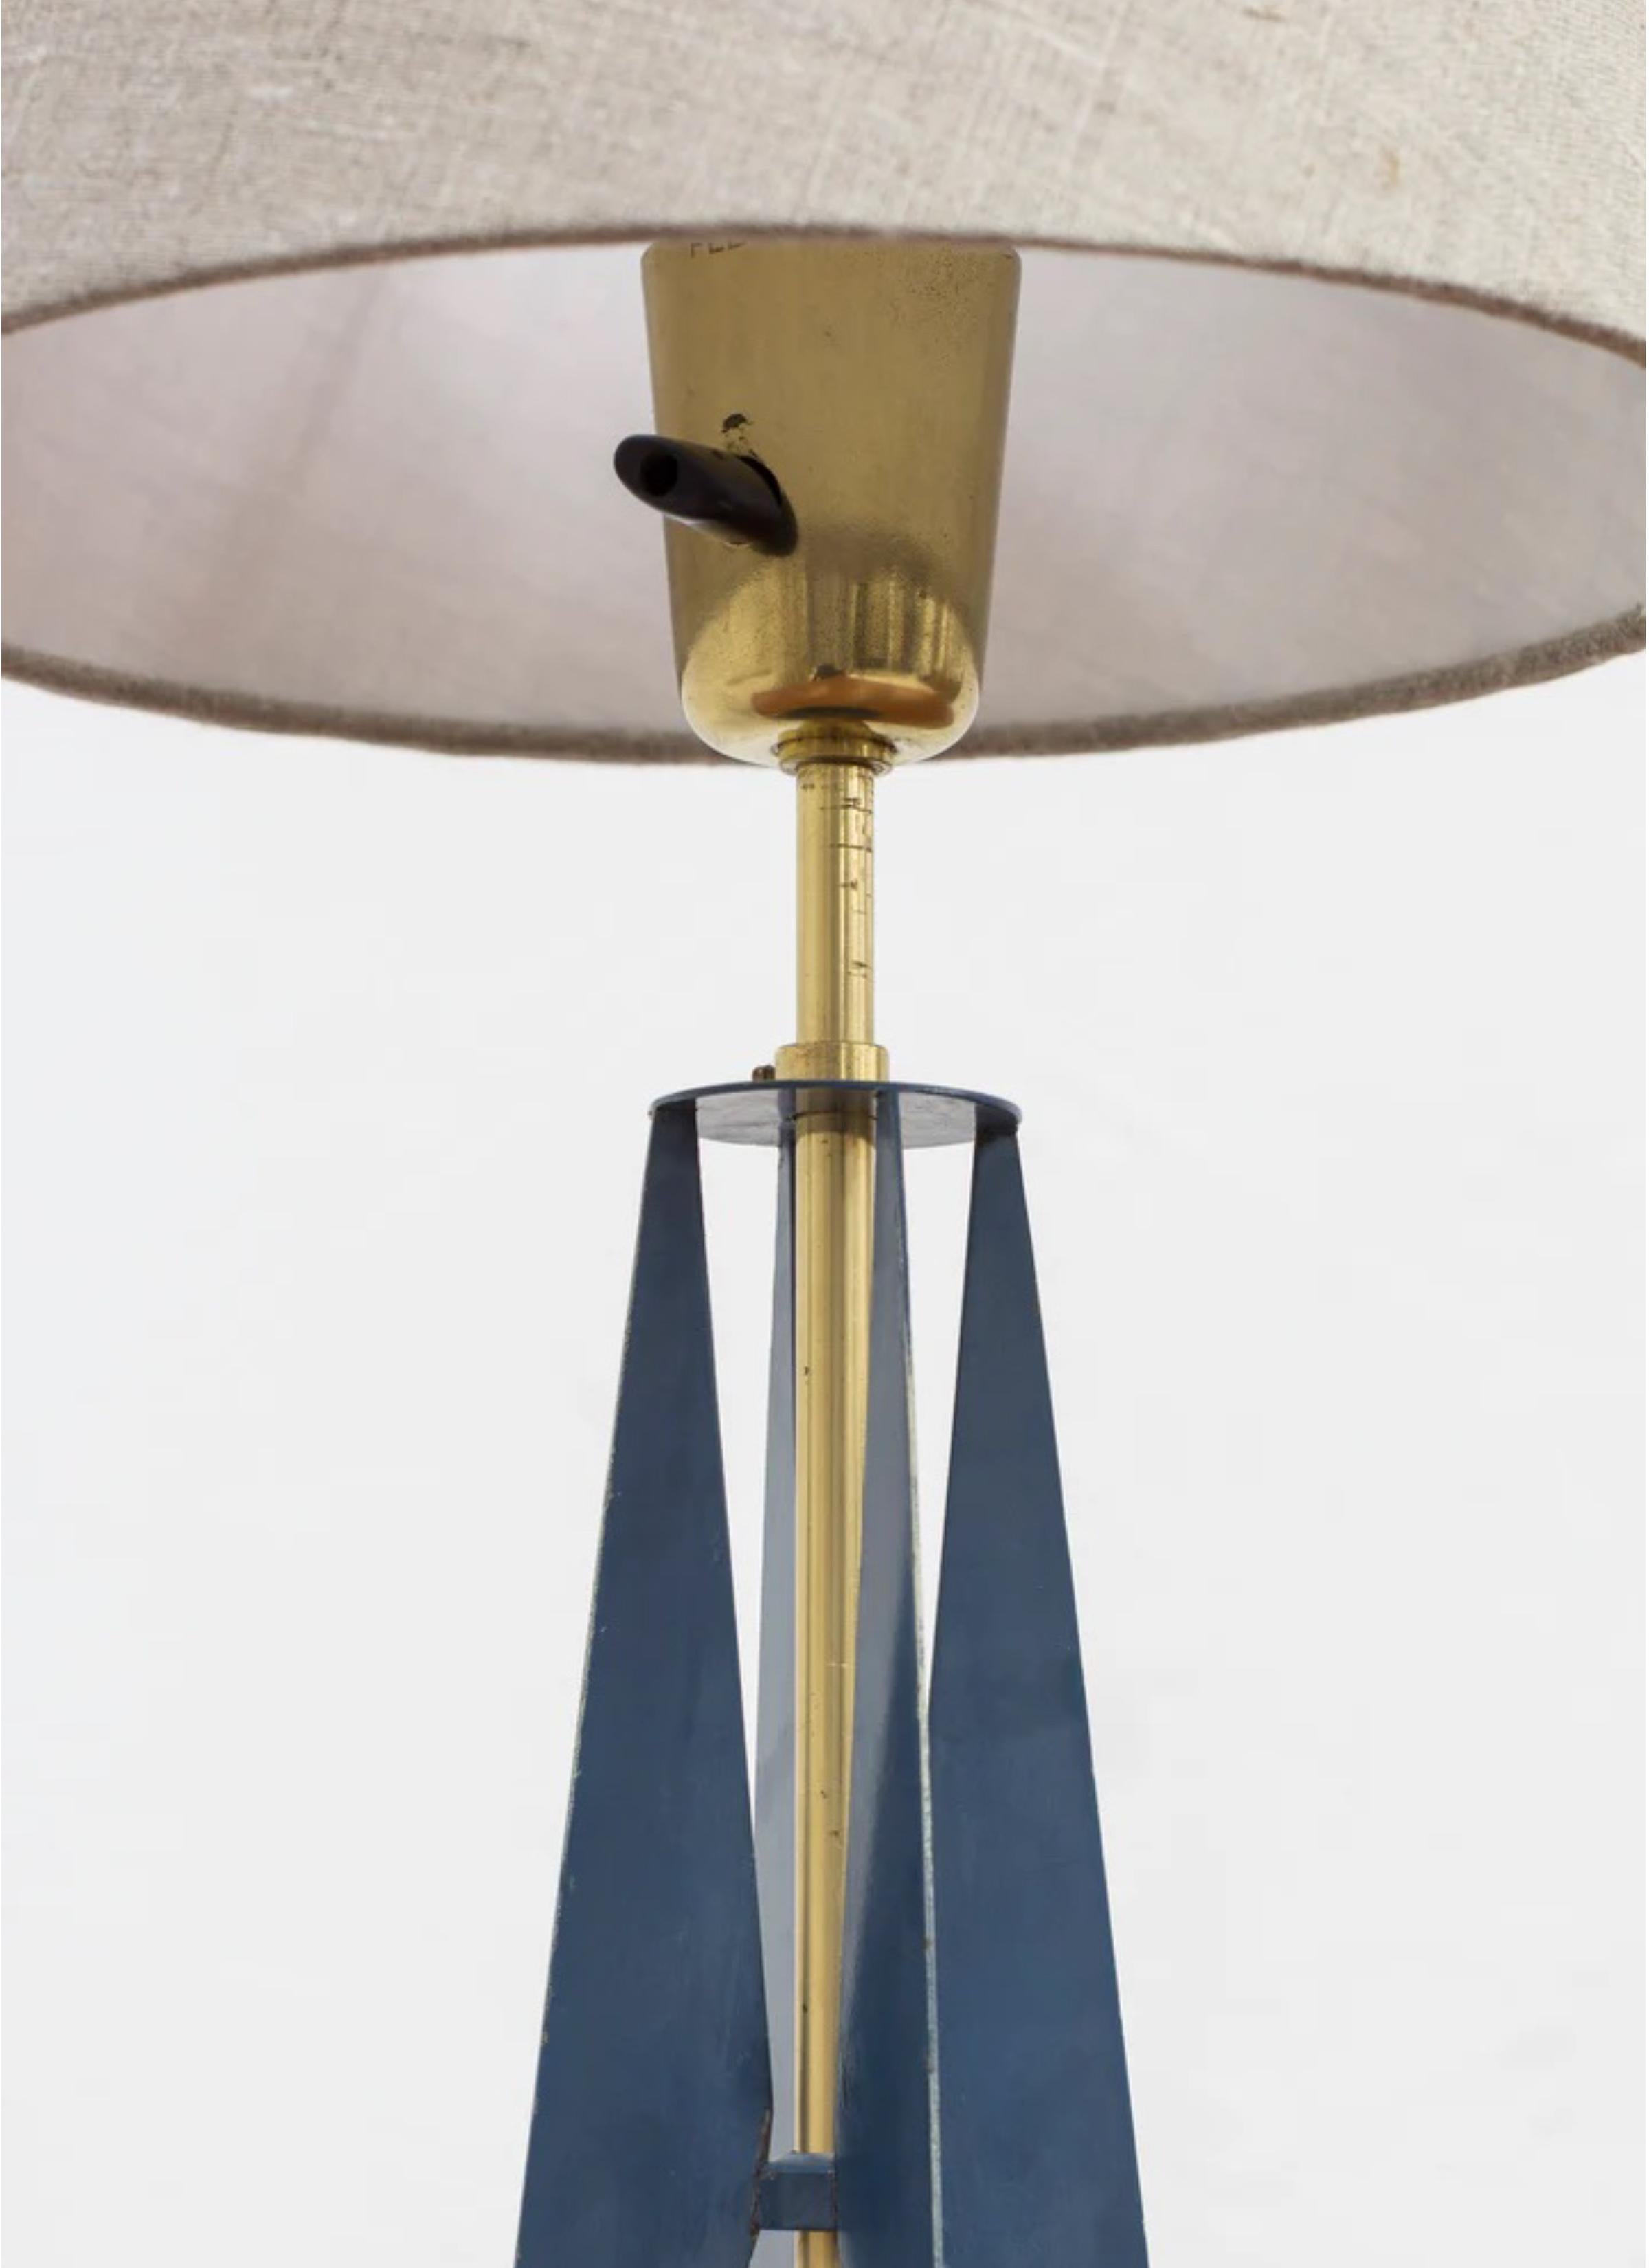 Table lamp produced in Sweden by Falkenbergs Belysning. Made sometime during the 1950s. Made from polished brass and metal with original blue paint. Original bakelite turn light switch in working order. New lamp shade in grey linen fabric. Good